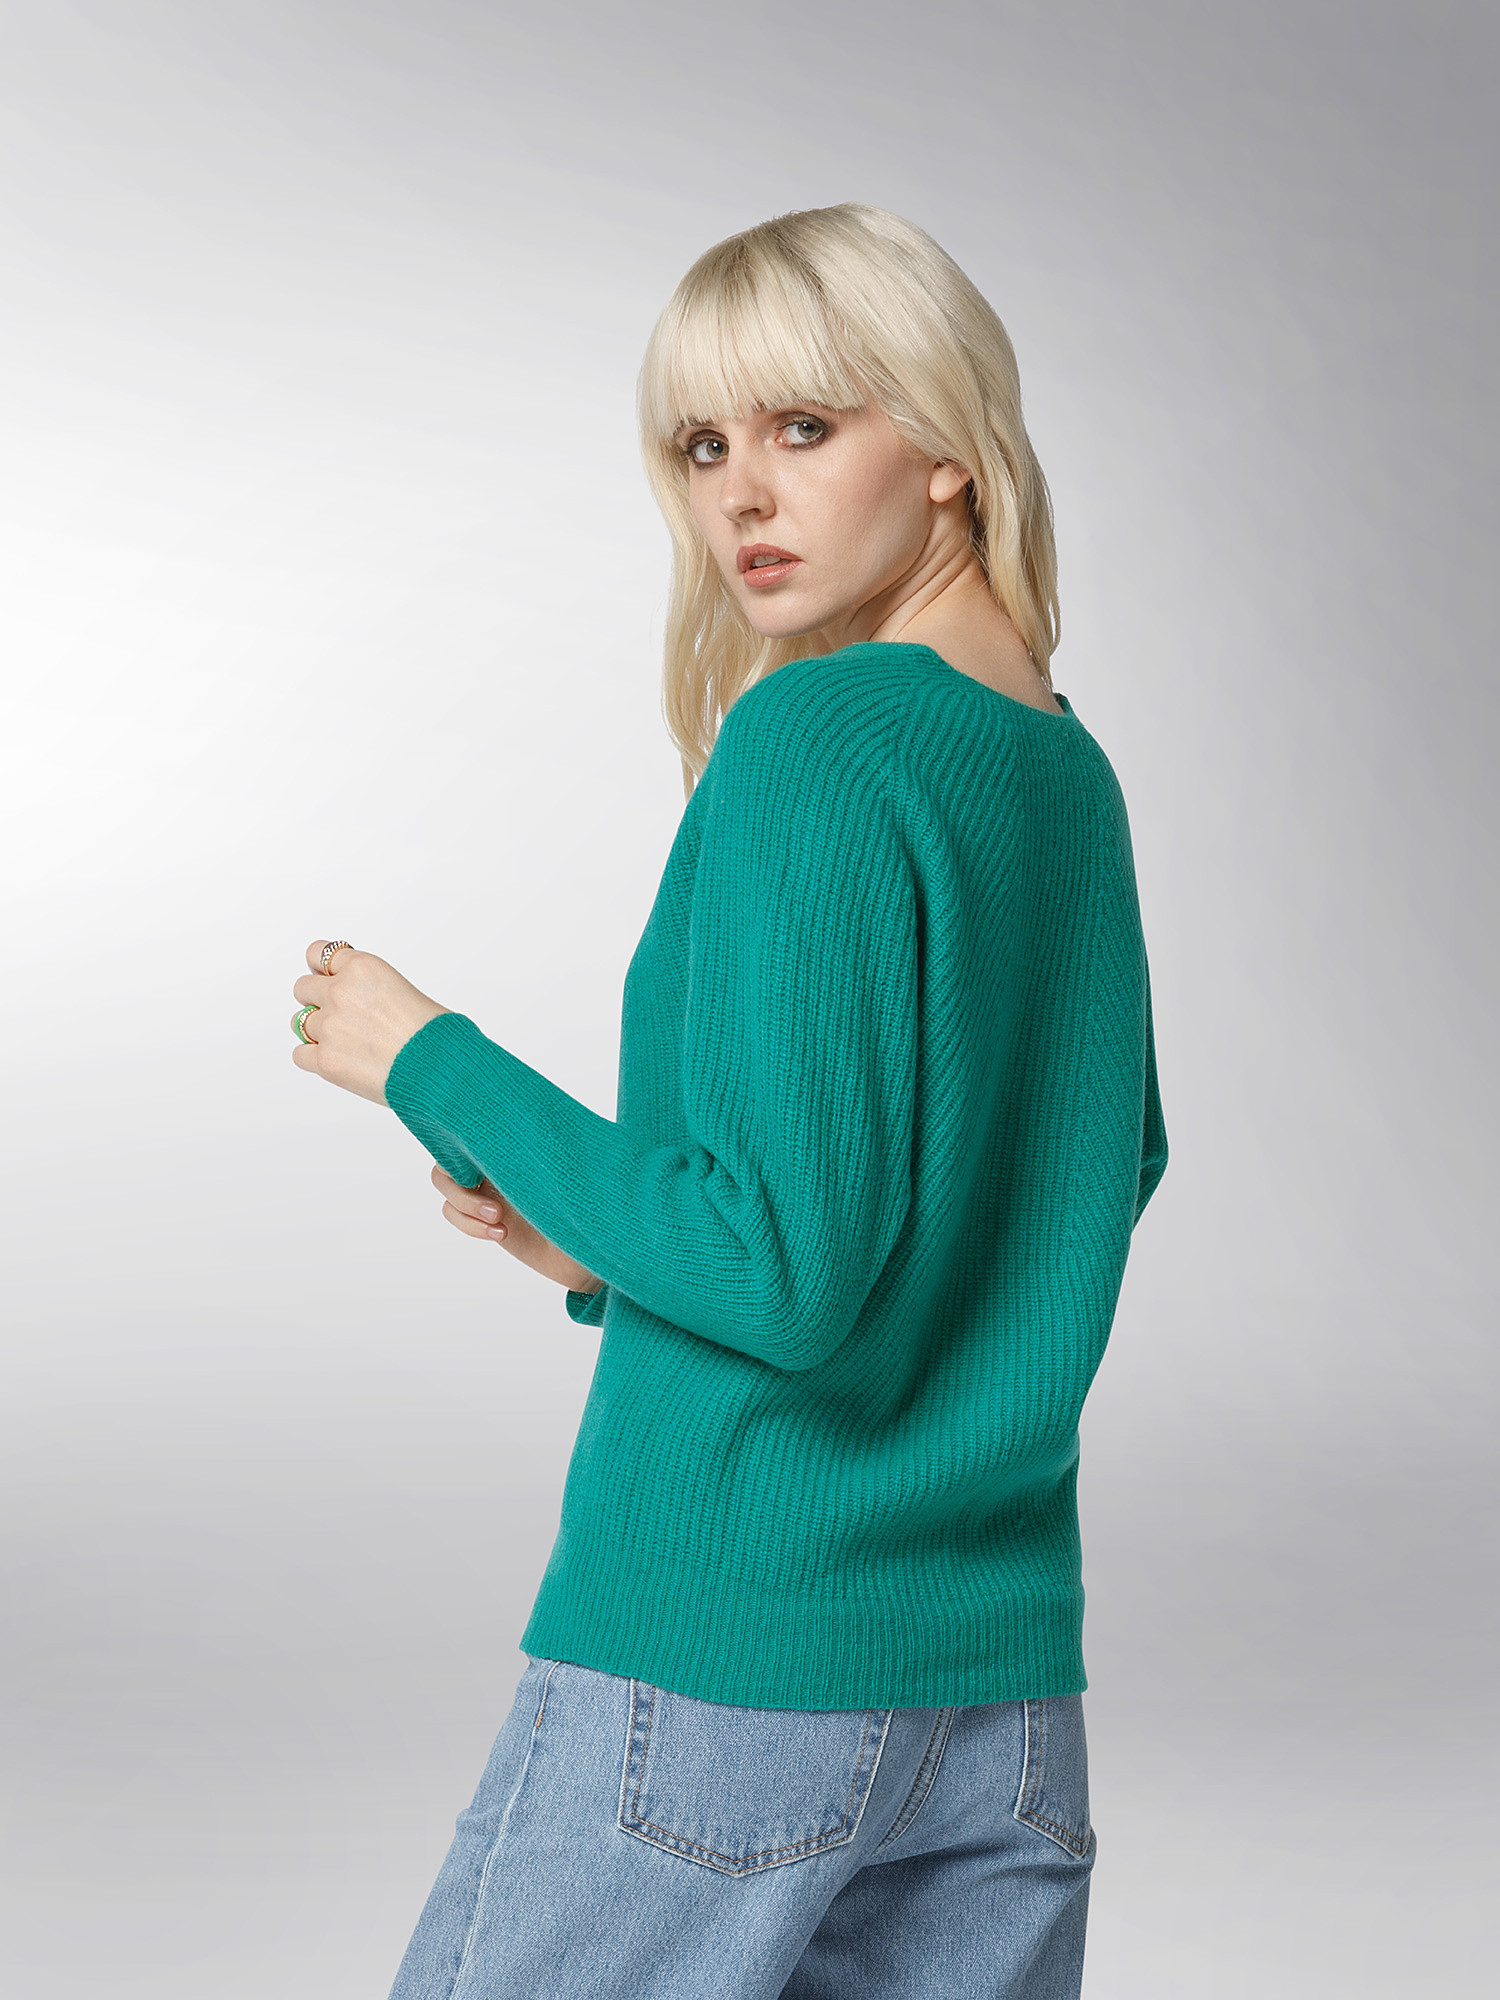 K Collection - Cardigan, Green, large image number 3